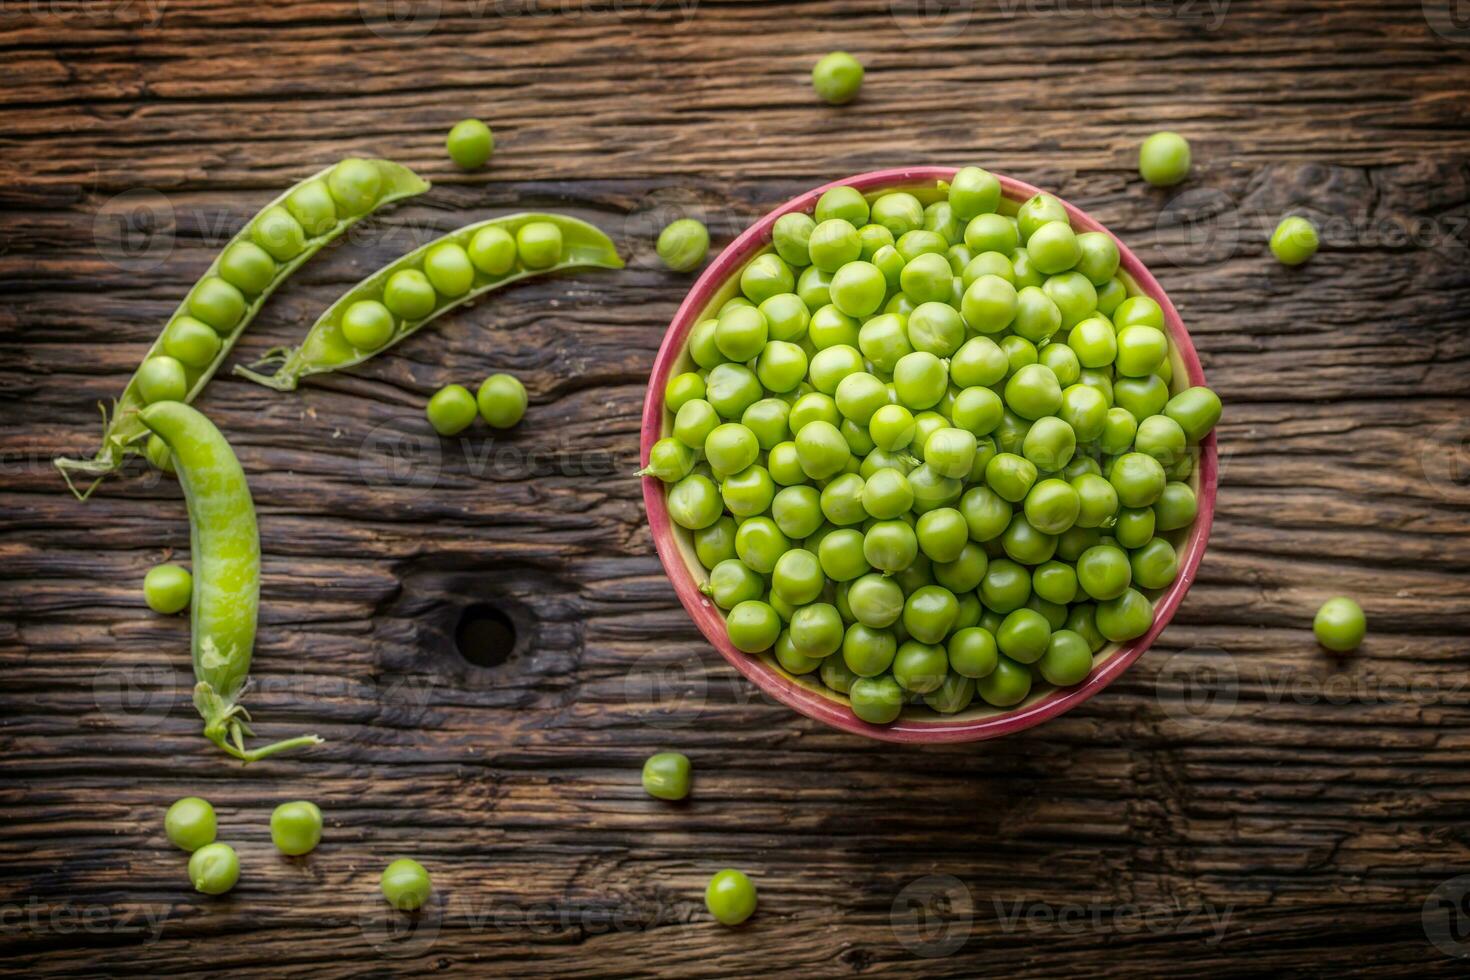 Peas. Fresh bio homemade peas and pods on old oak board. Healthy fresh green vegetable - peas and pods. photo